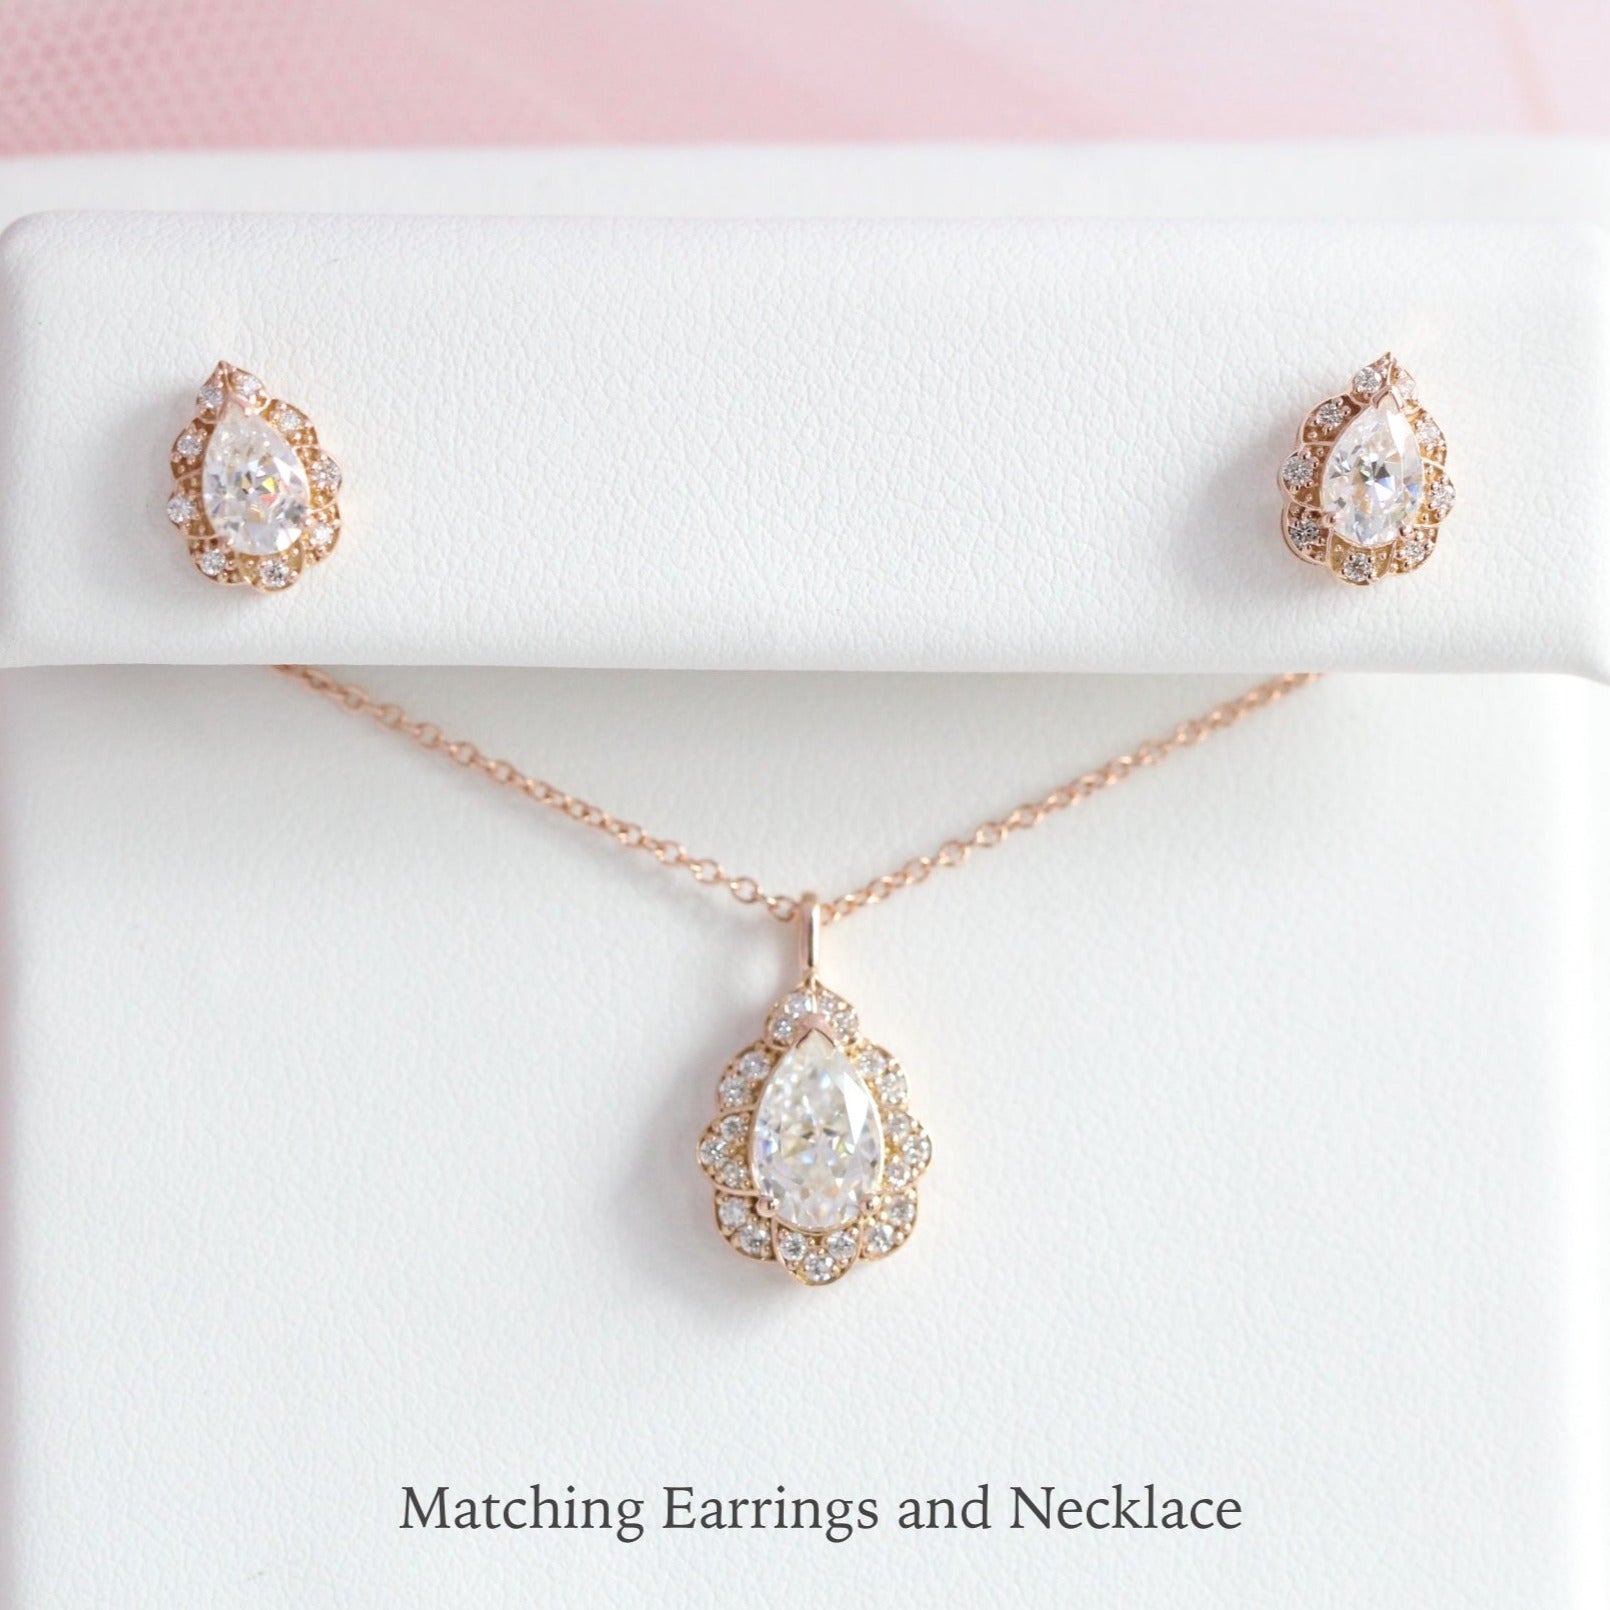 Matching Diamond Earrings and Necklace Rose Gold Wedding Jewelry Set La More Design JEWELRY